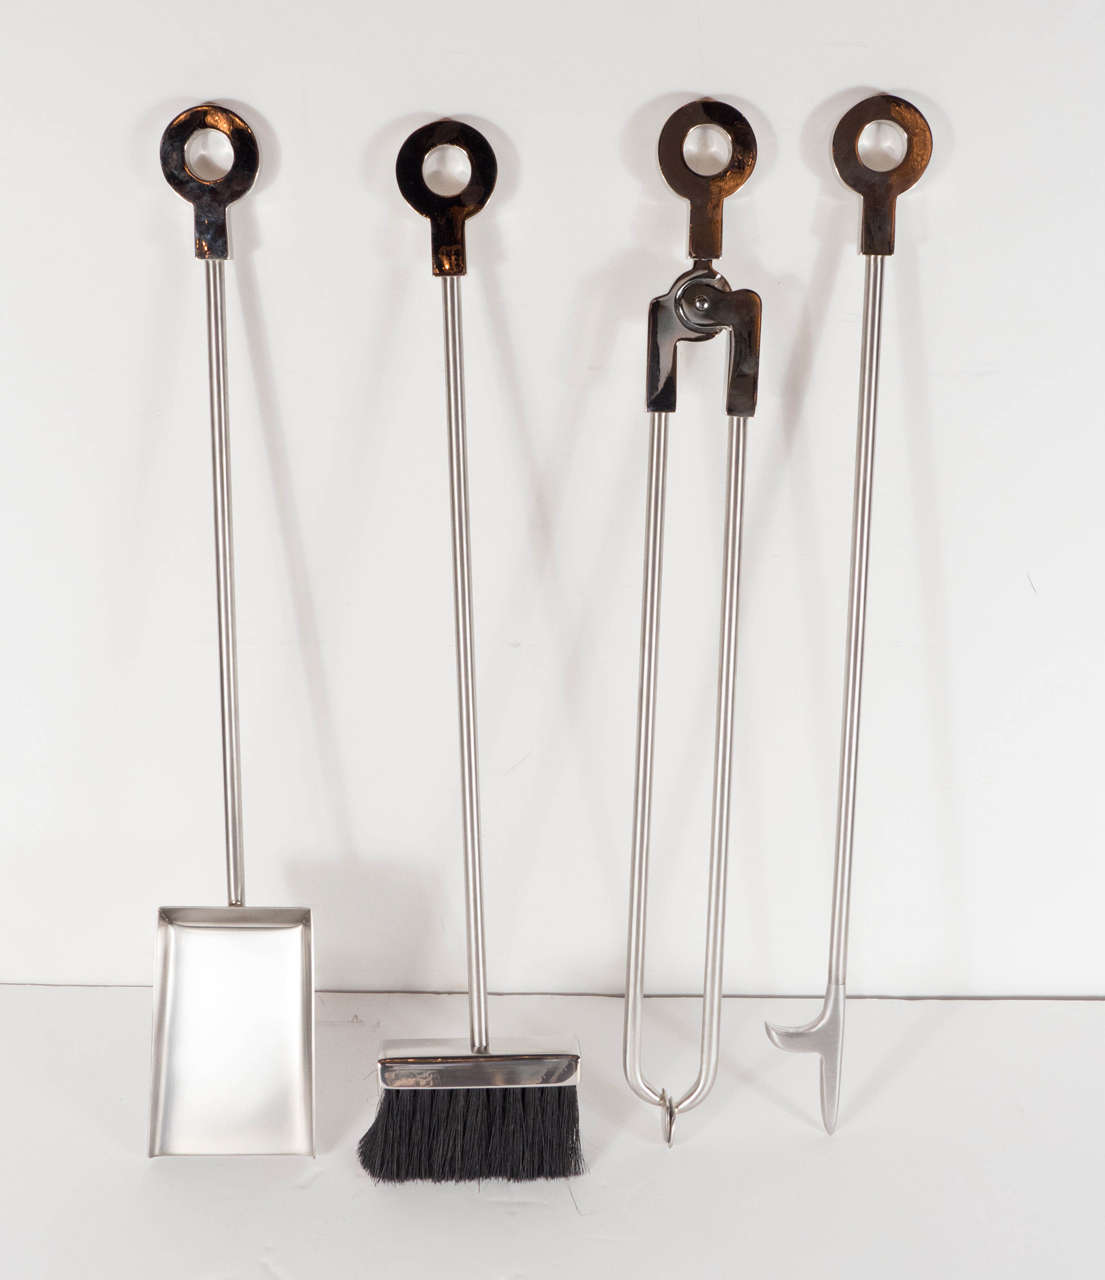 Modernist Brushed & Polished Nickel Four Piece Fire Tool Set by High Style Deco In Excellent Condition For Sale In New York, NY